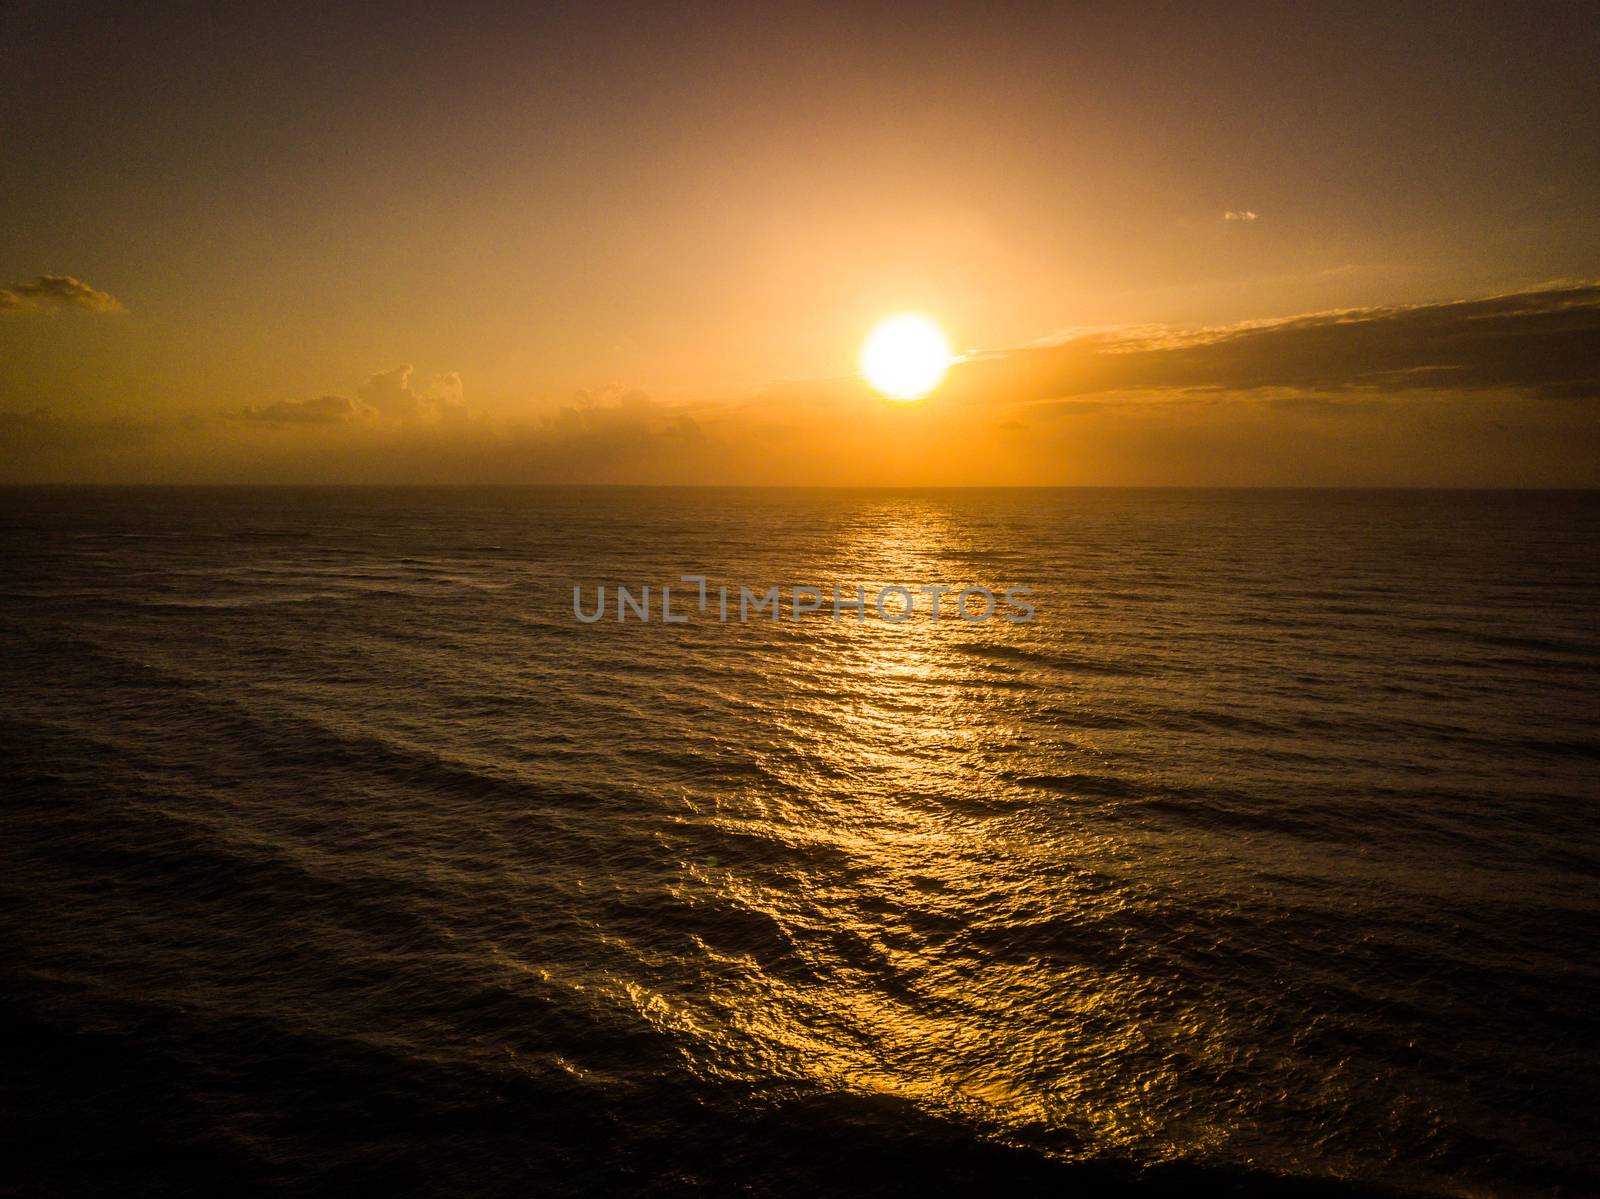 Sunrise of the Indian ocean on the Swahili coast. by Simoneemanphotography